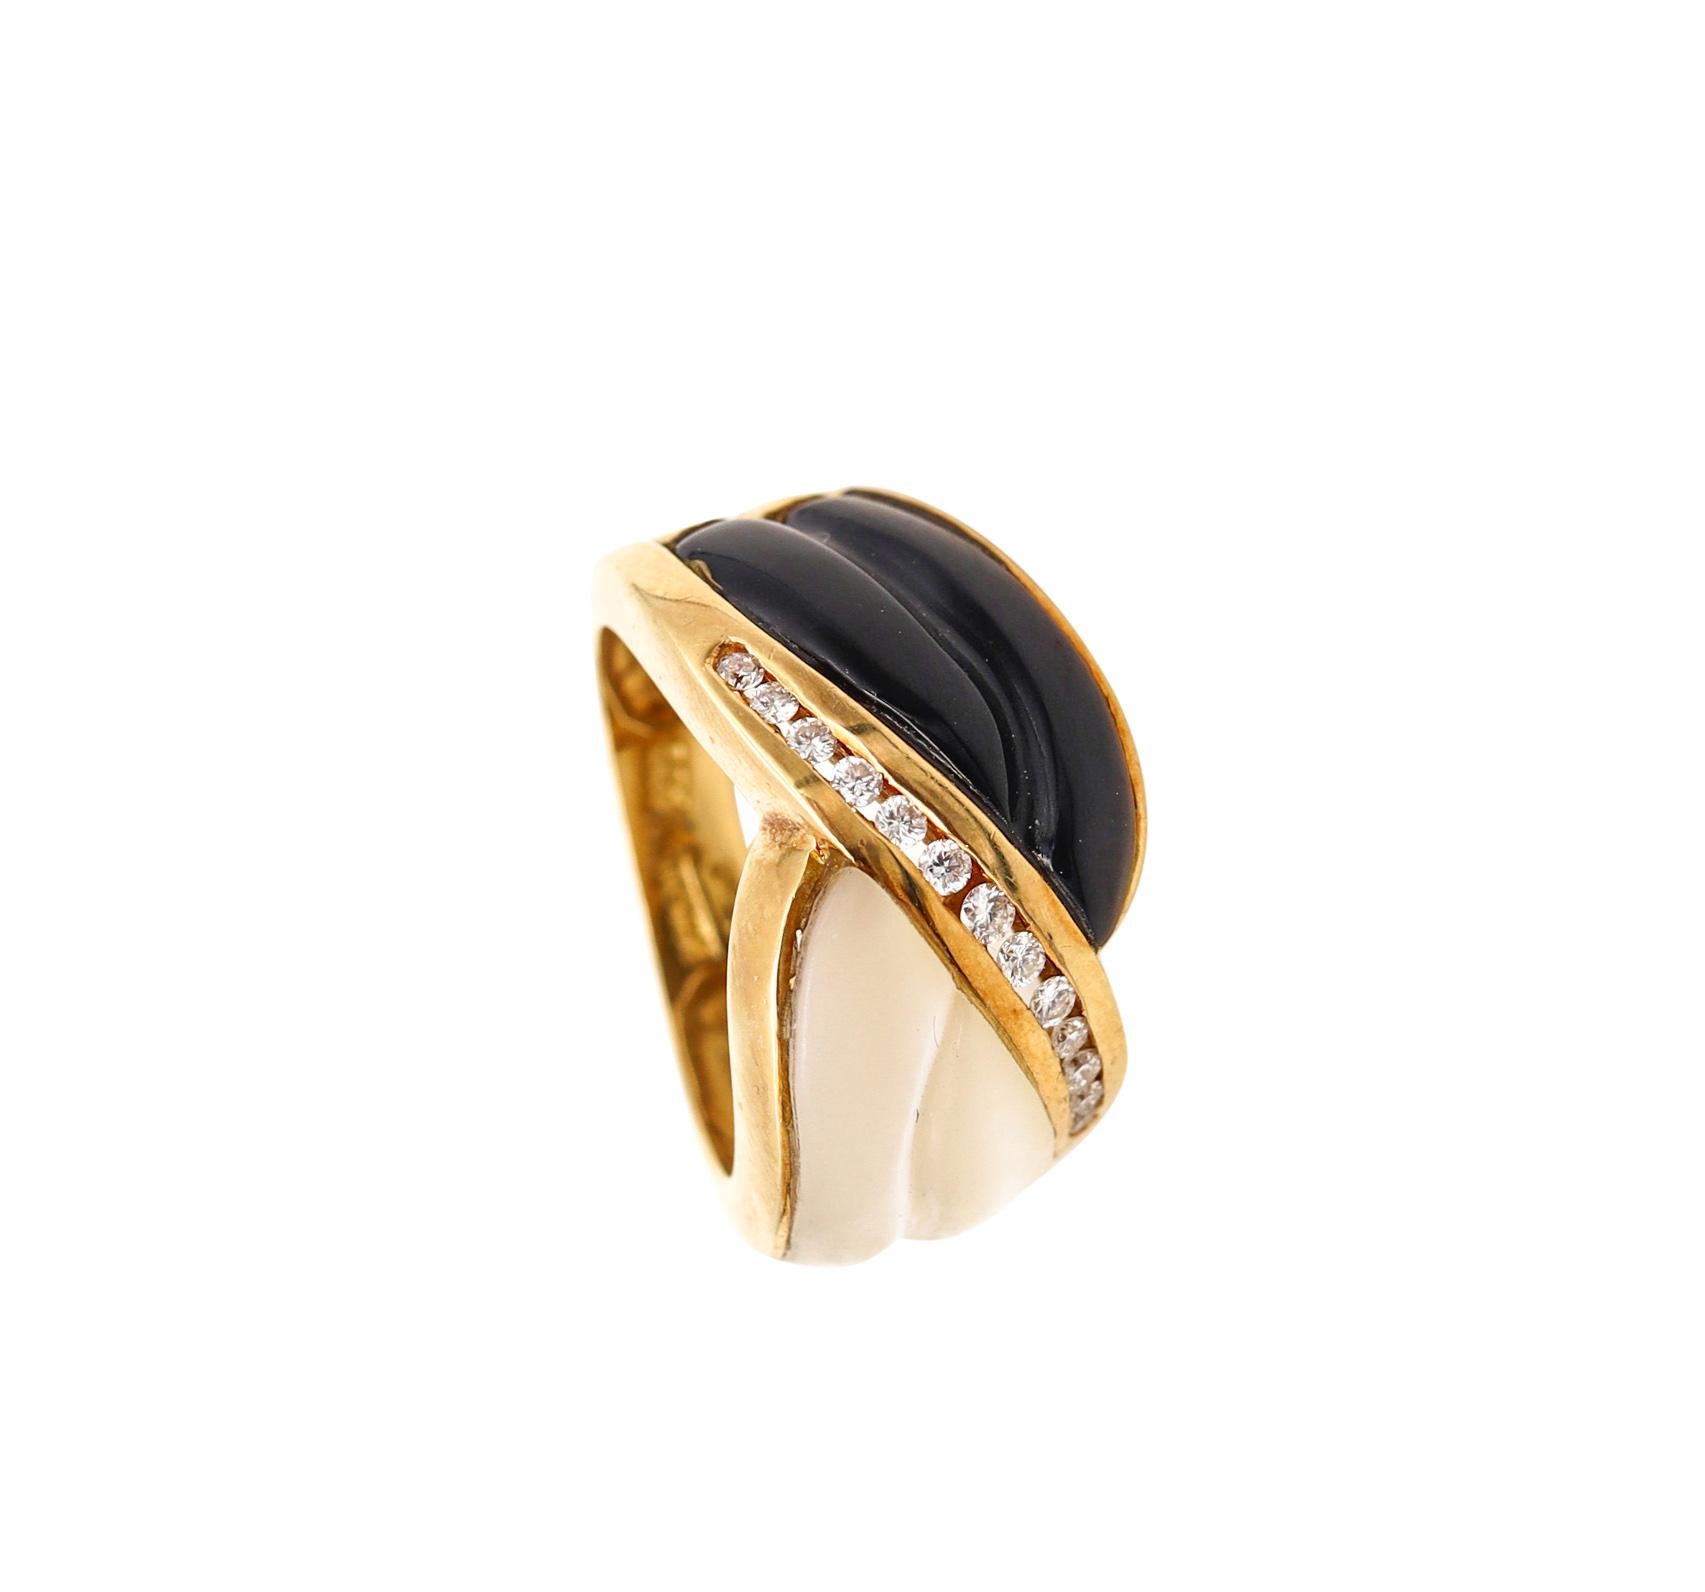 Beautiful French Ring designed by Denoir

Elegant piece, created in Paris France by the jewelry house of Denoir. It was crafted in solid yellow gold of 18 karats and embellished with two undulate organic elements carved from natural black onyx and